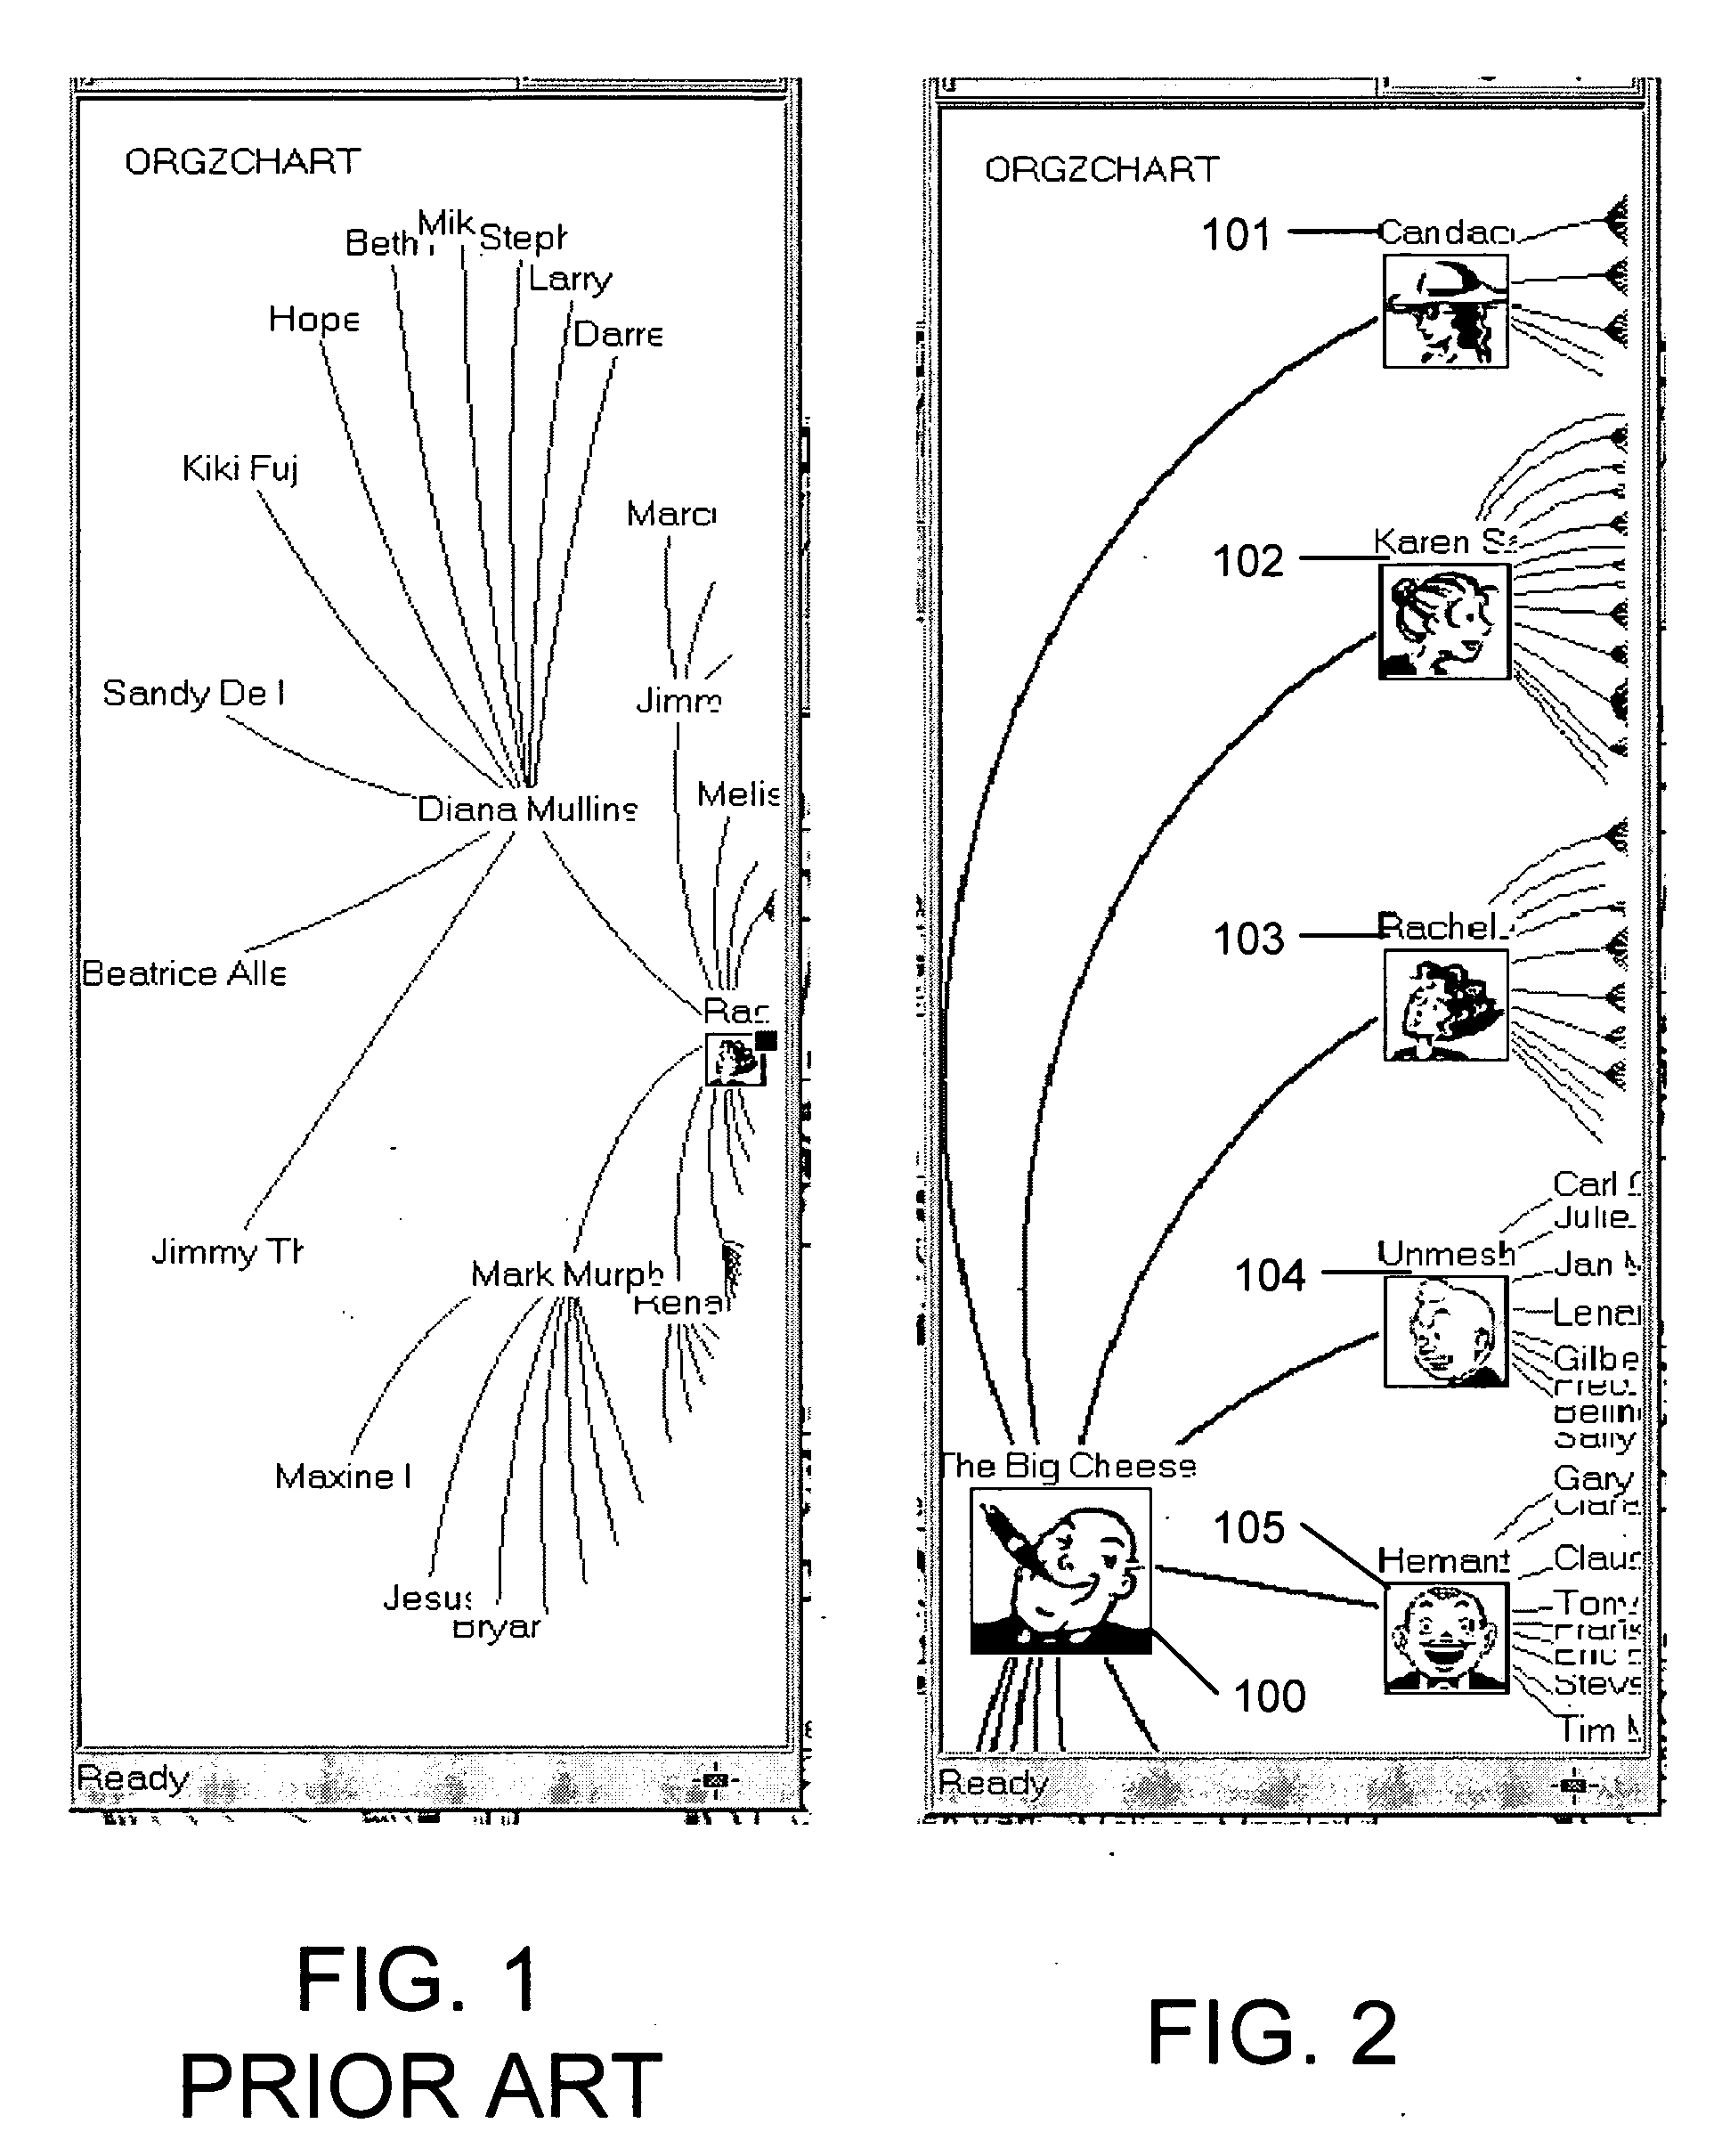 Tree visualization system and method based upon a compressed half-plane model of hyperbolic geometry